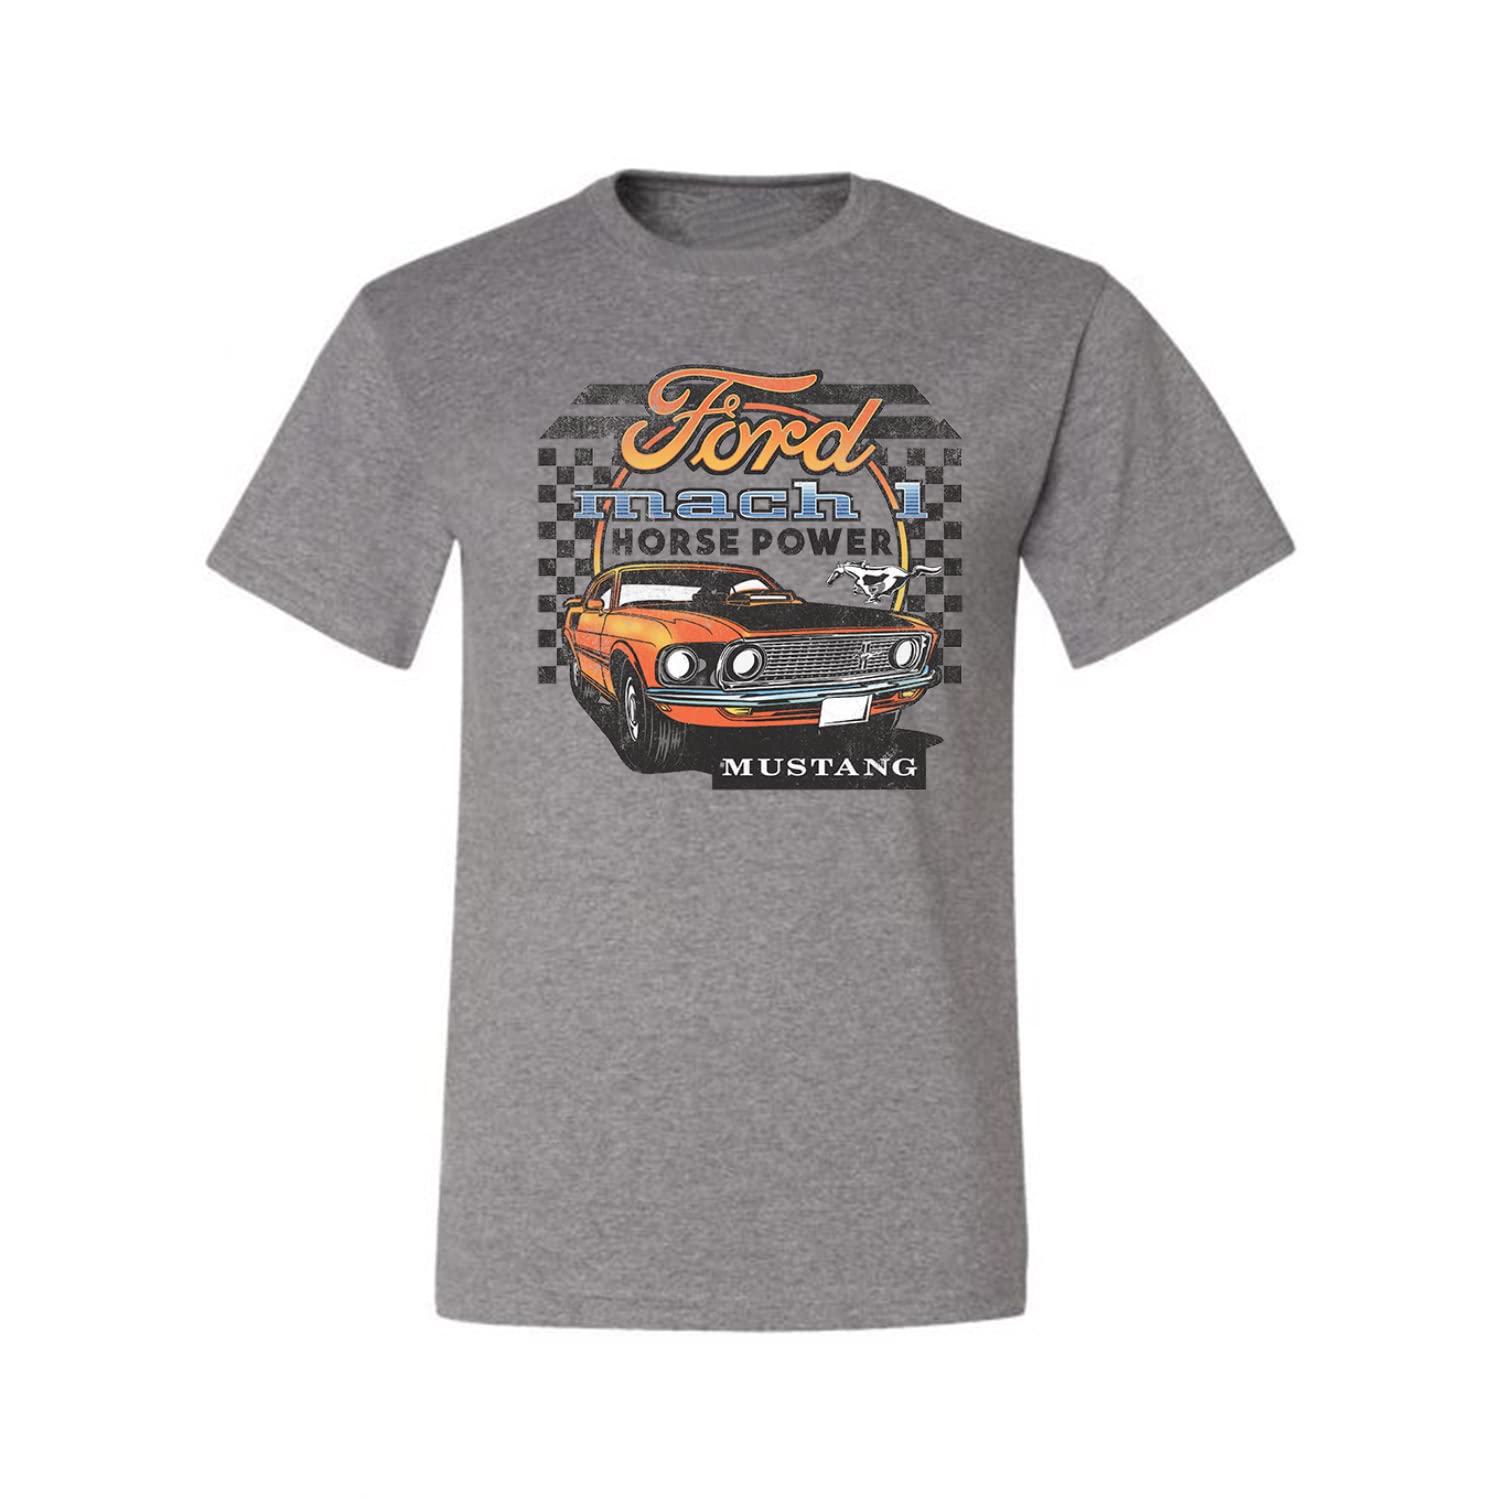 Ford Mustang Mach 1 Horse Power Classic Racing Cars and Trucks Men's Graphic T-Shirt, Heather Grey, 3X-Large